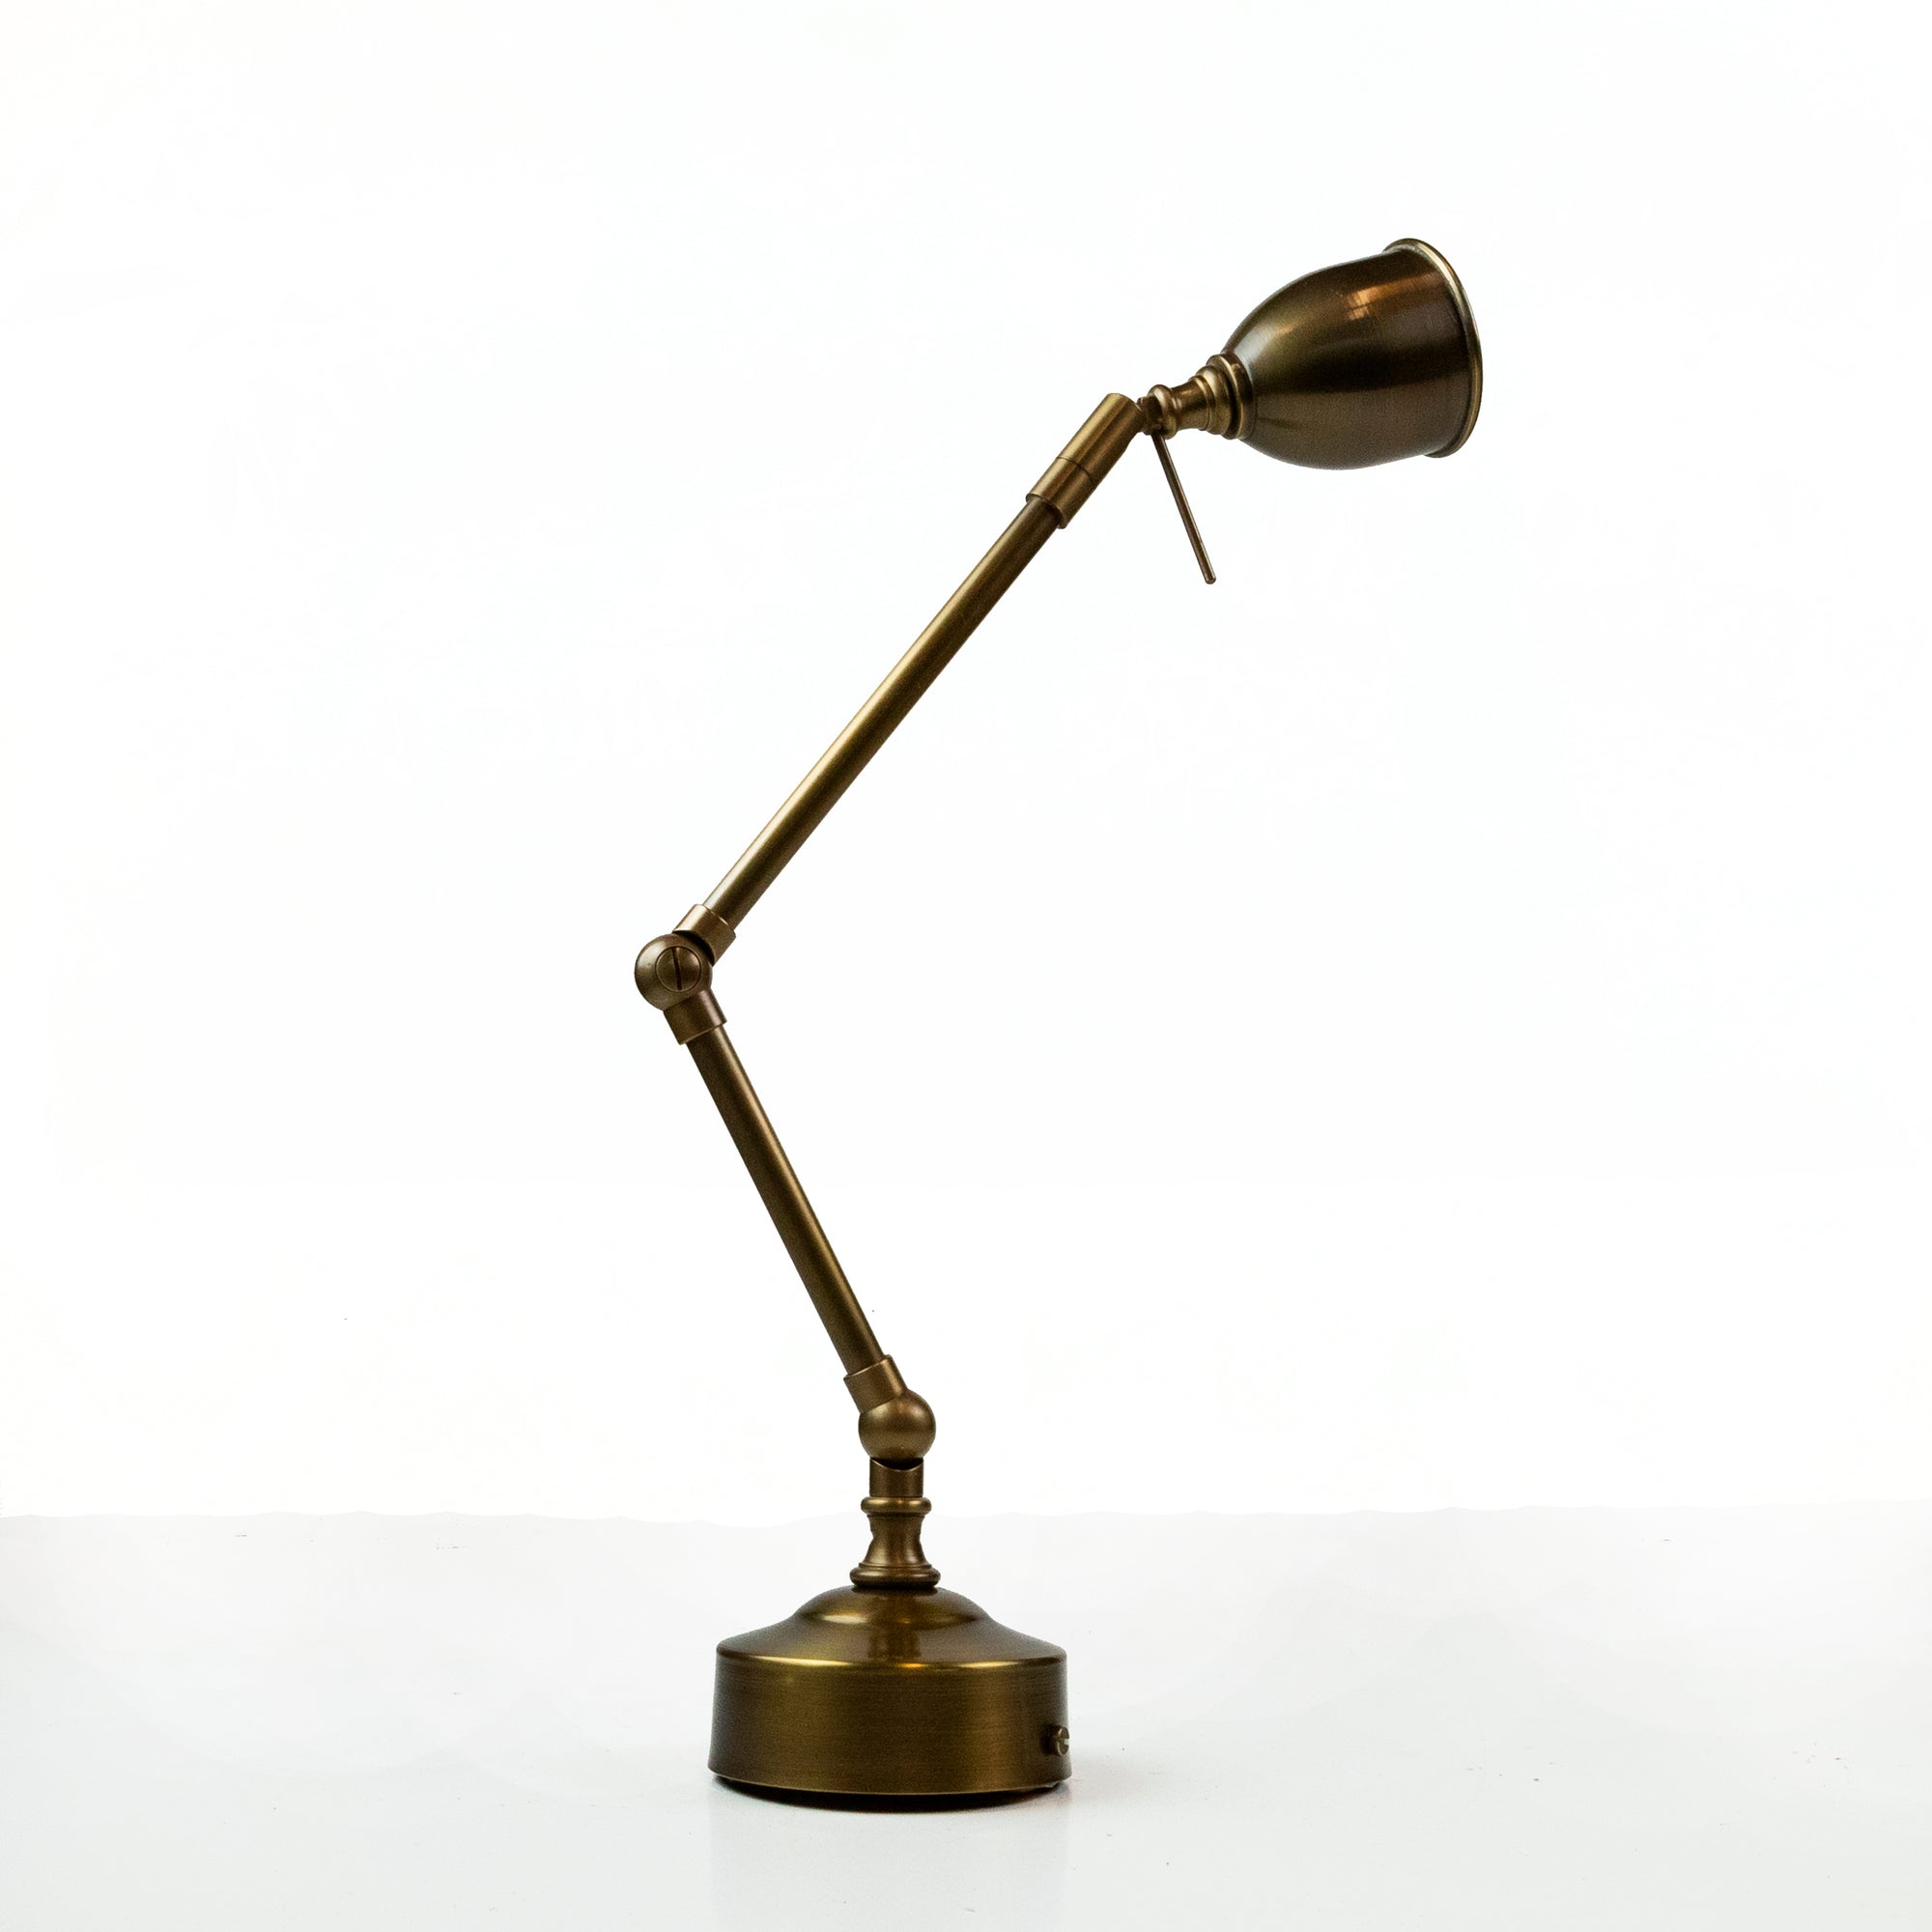 Adjustable Besselink & Jones anglepoise wall Lamp | sconce in bronze finish | The Architectural Forum